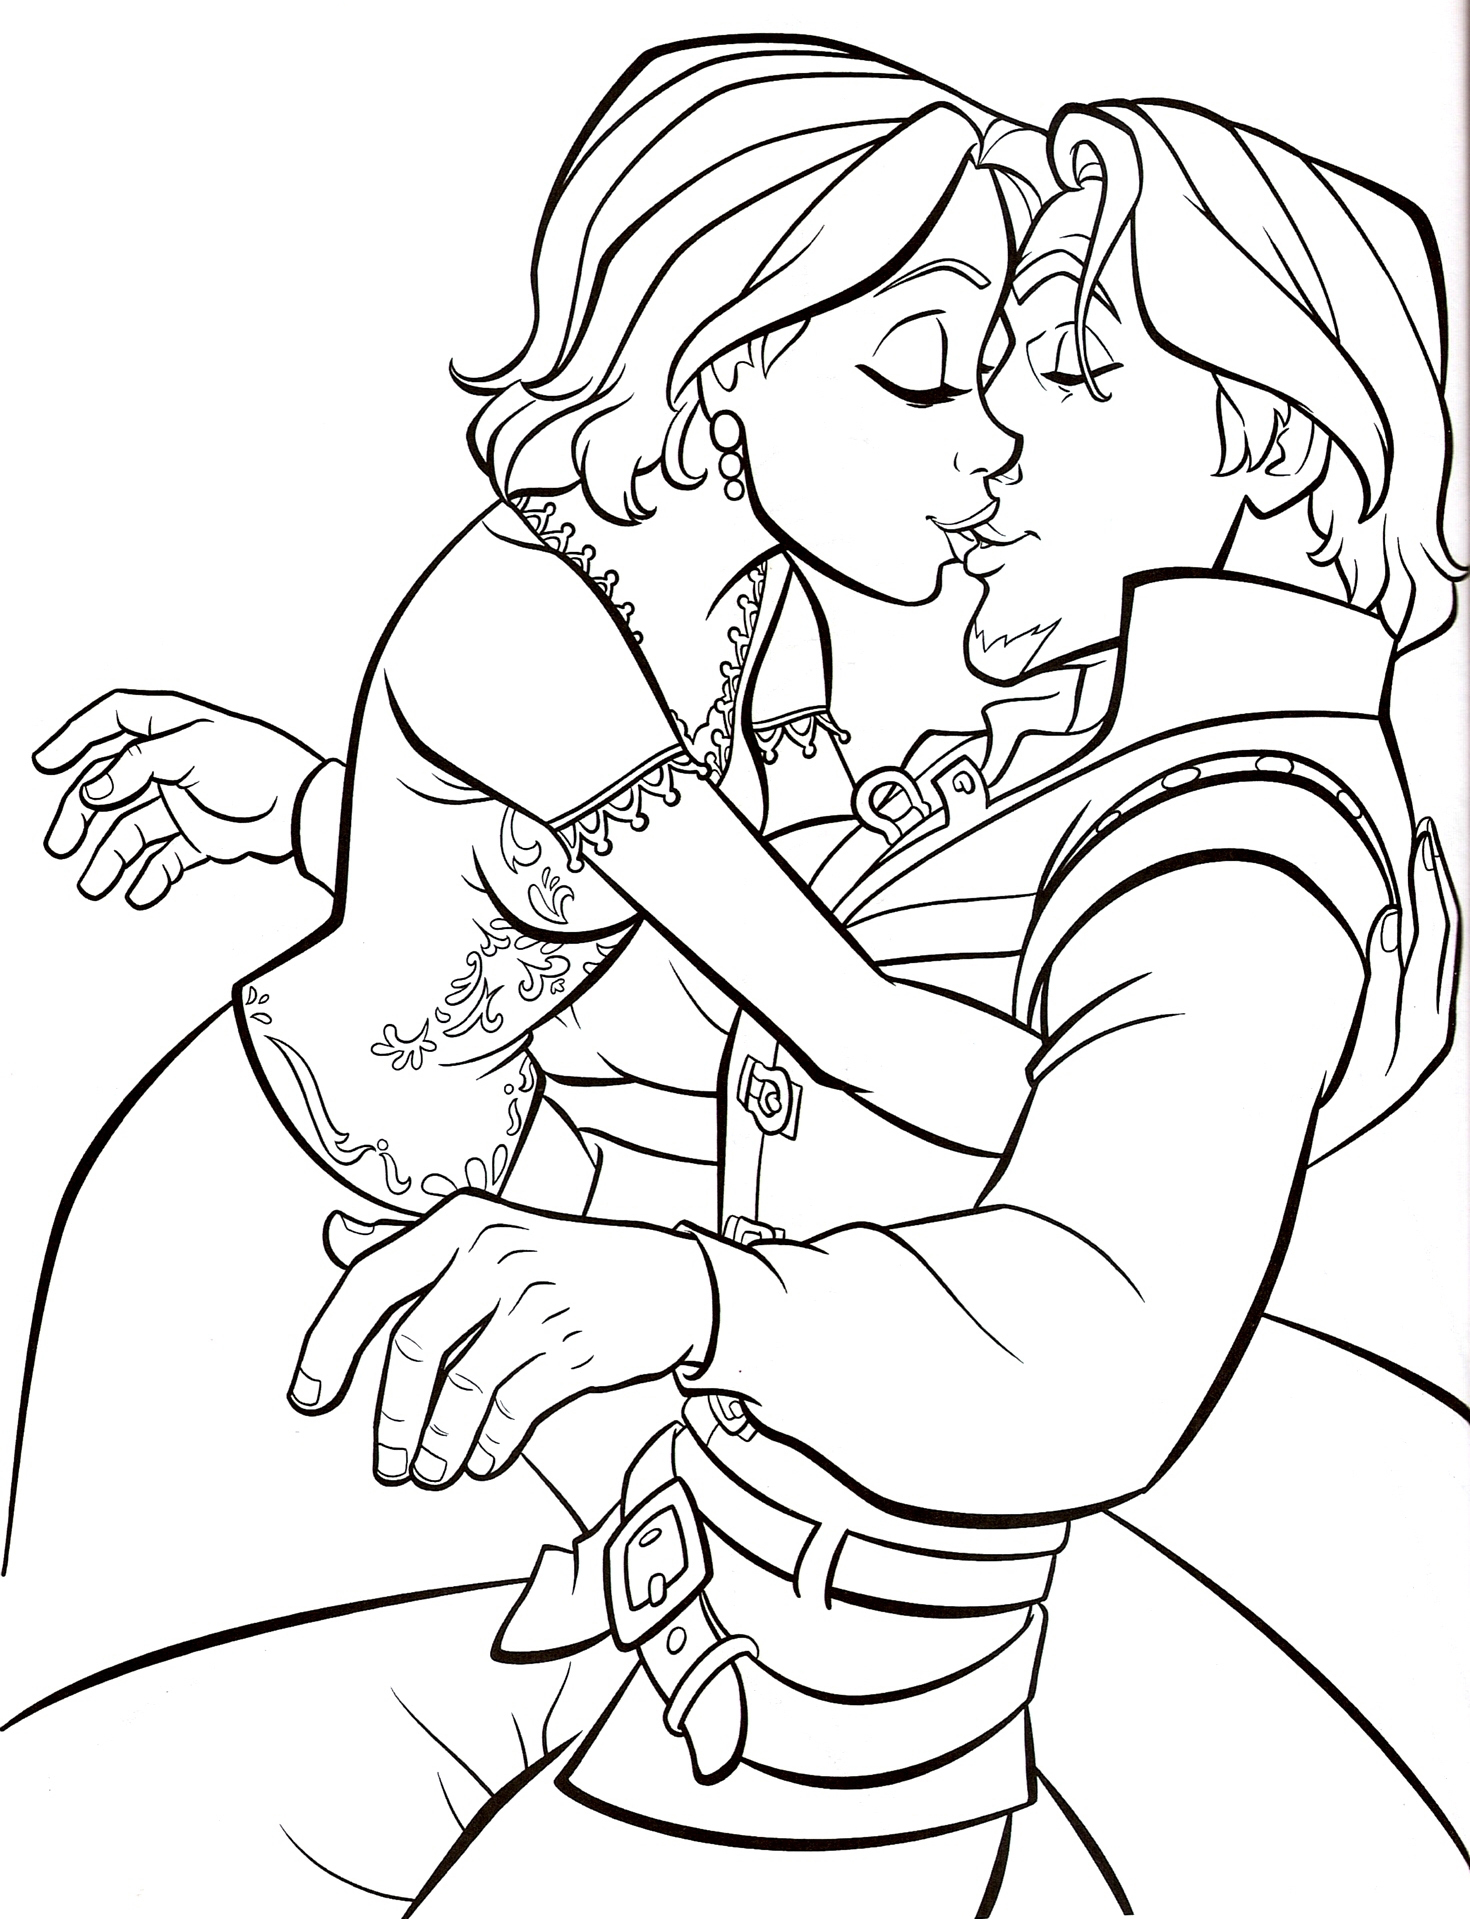 tangled coloring pages advanced - photo #19